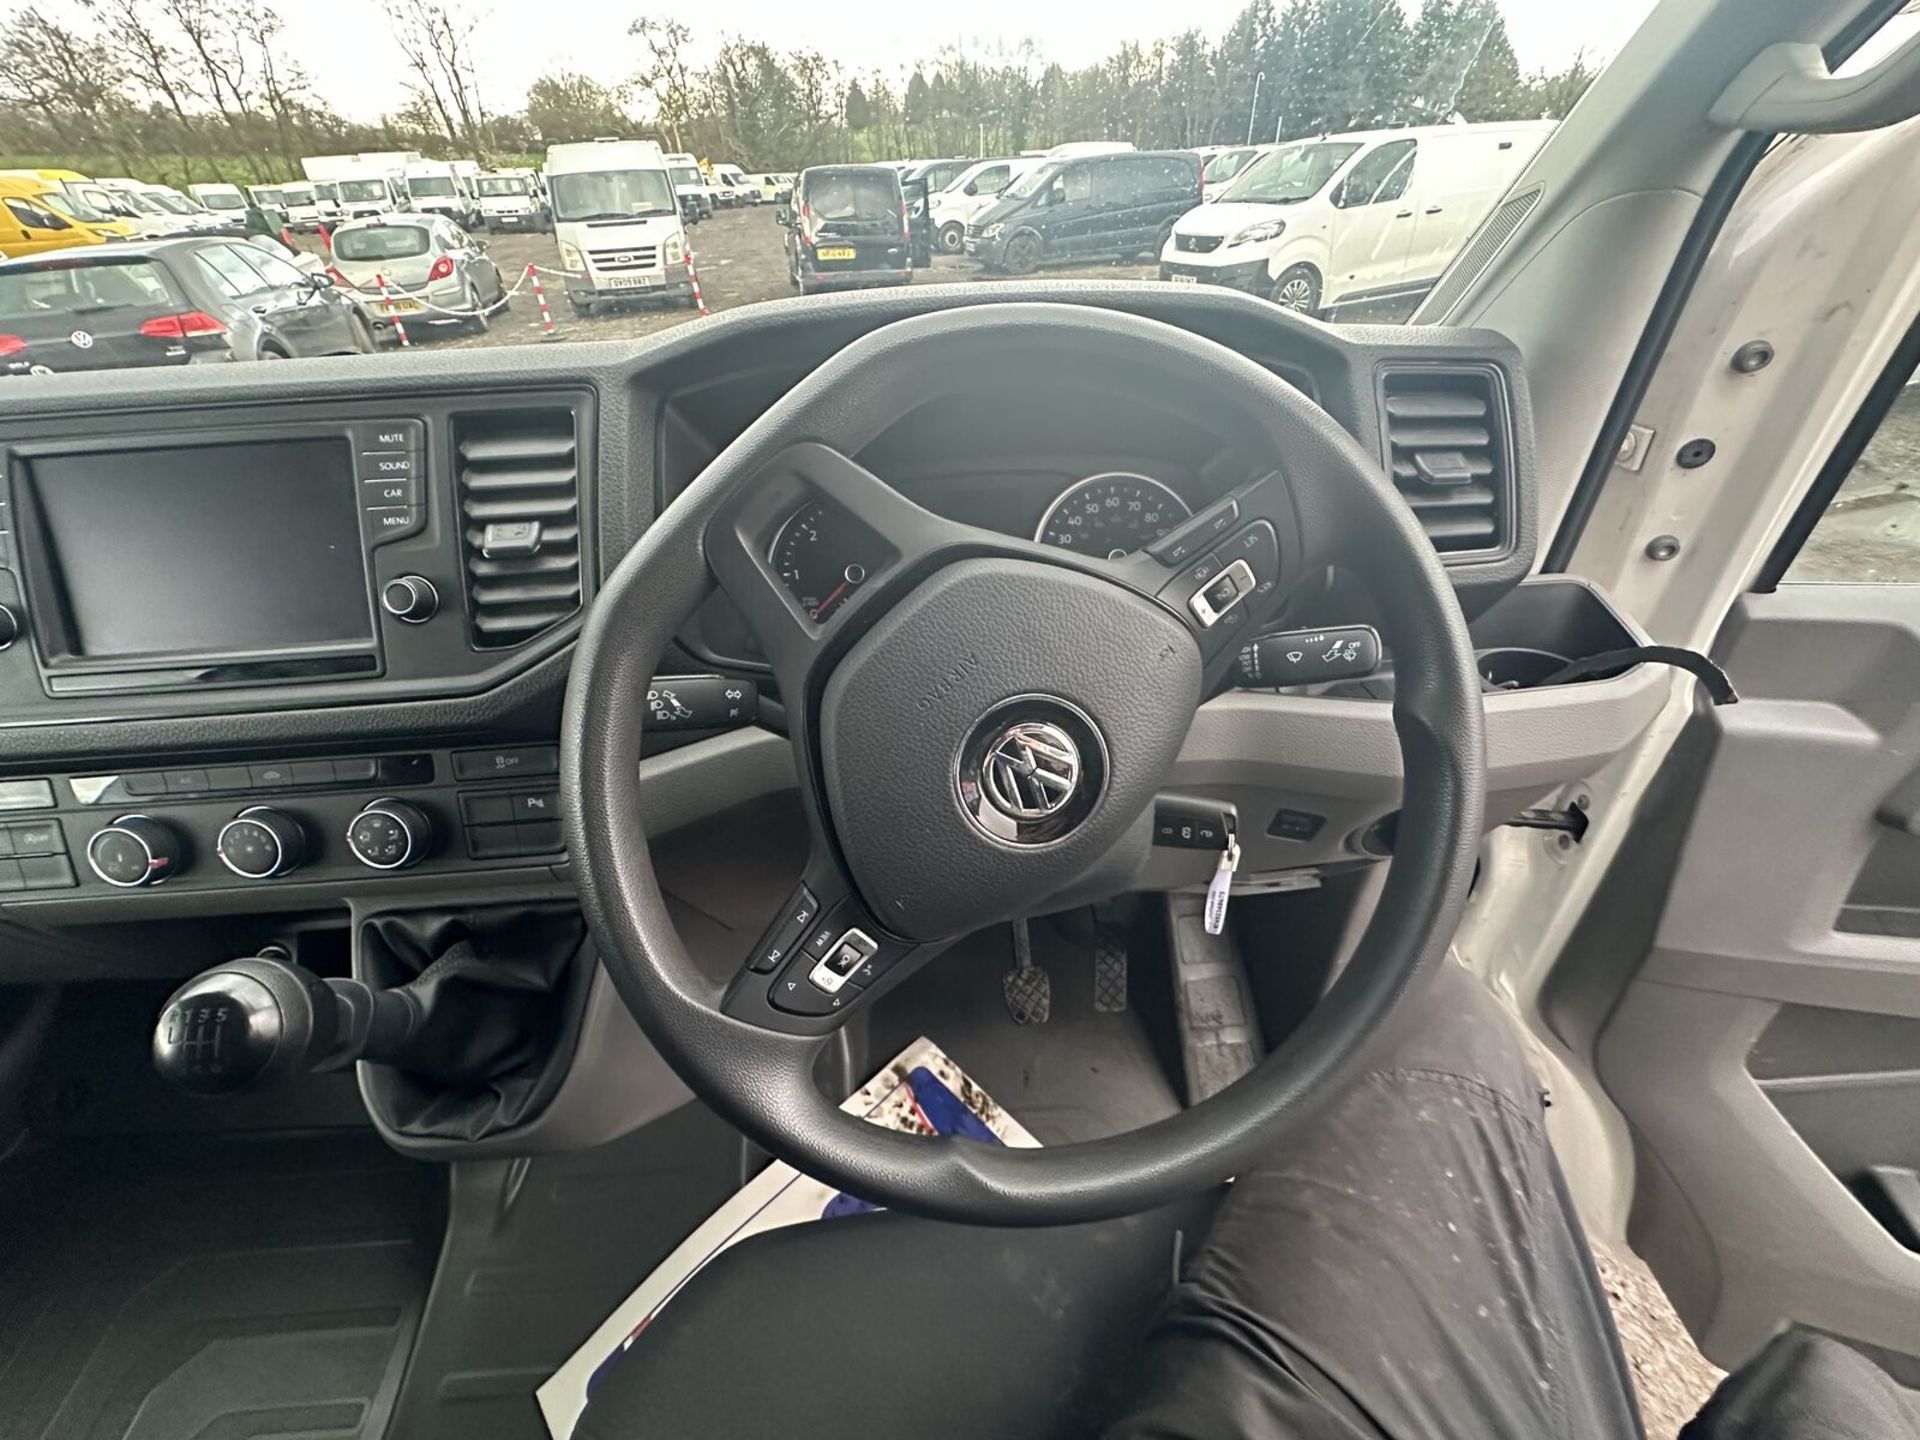 2020 VW CRAFTER: LOW MILES, HIGH POTENTIAL, TIMING BELT ISSUE >>--NO VAT ON HAMMER--<< - Image 8 of 15